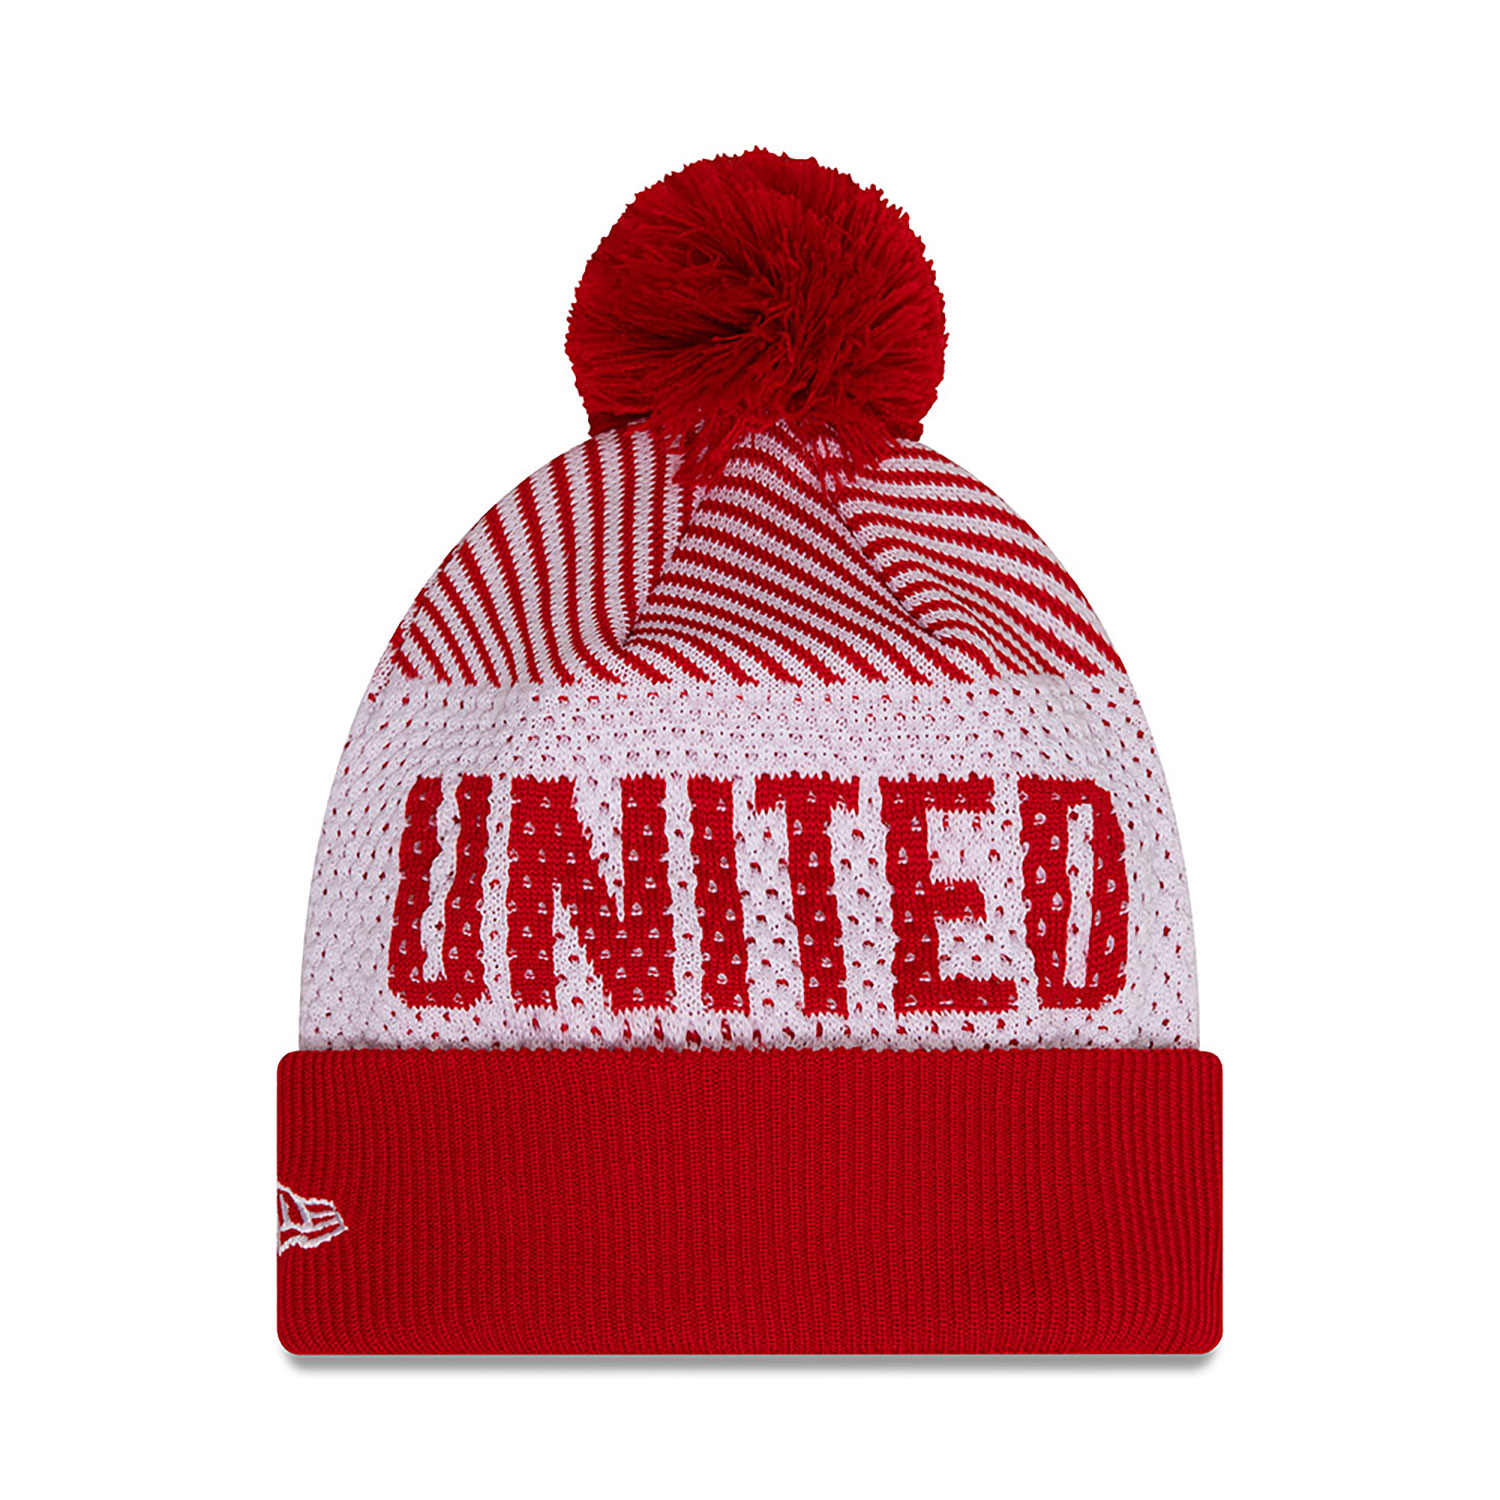 Manchester United FC Engineered Red Cuff Knit Beanie Hat